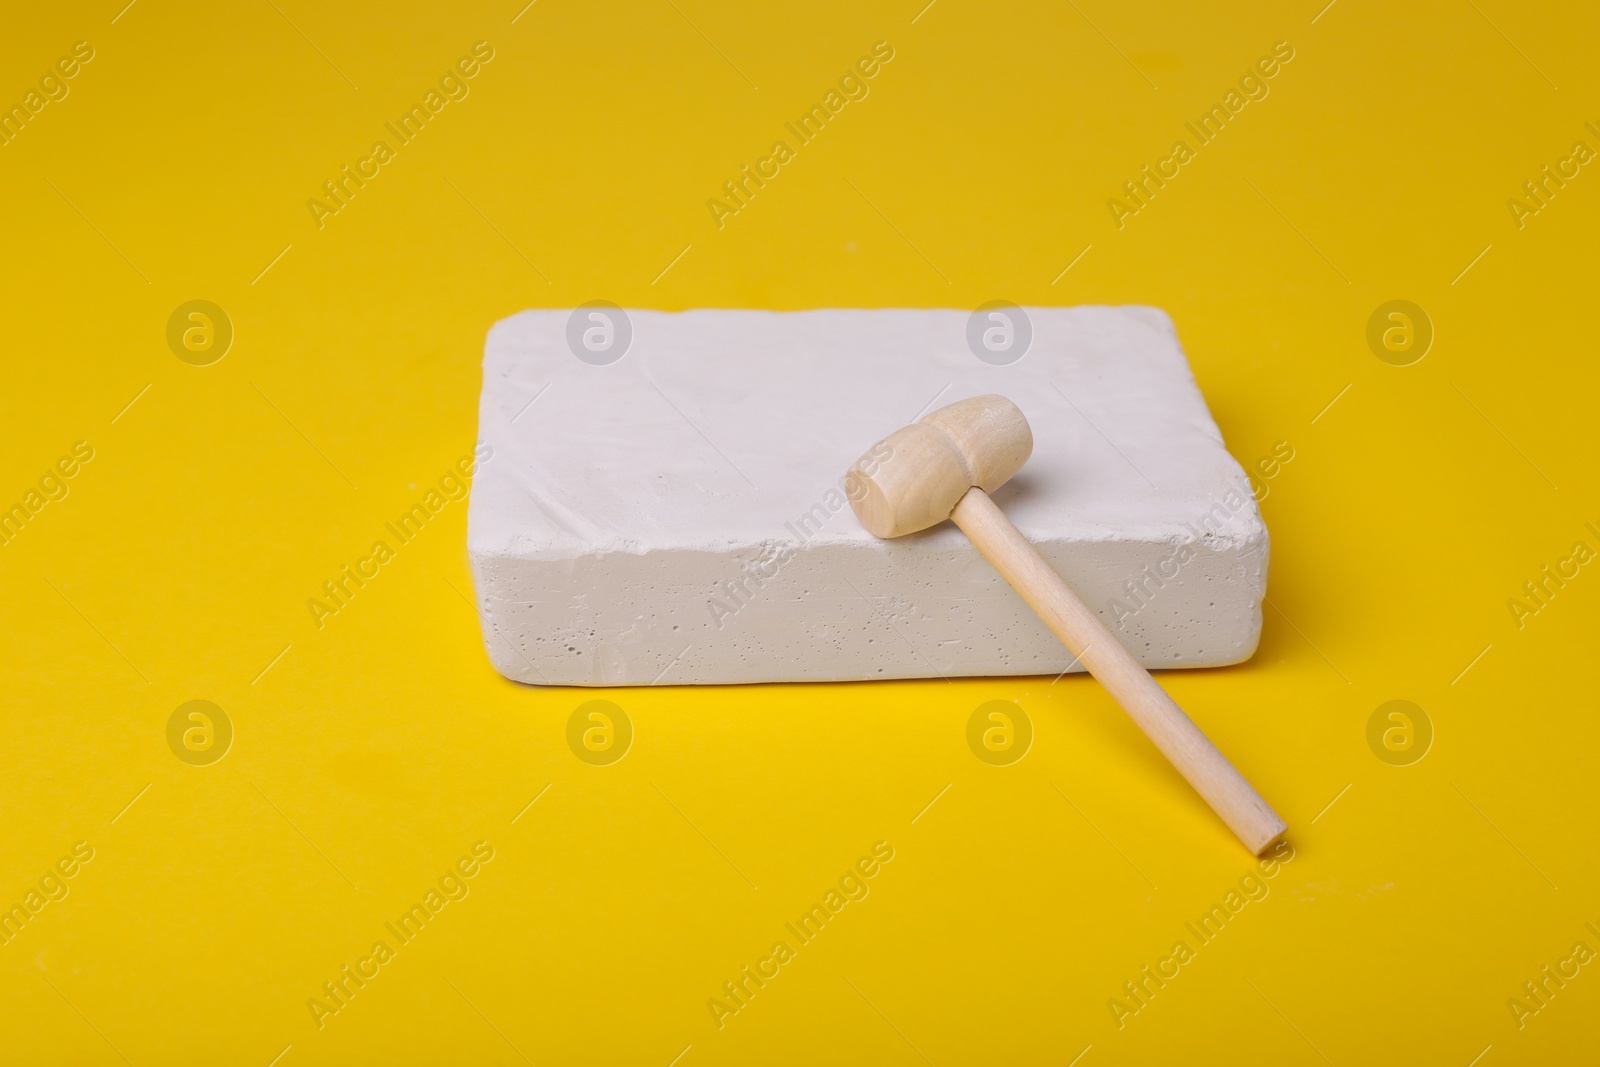 Photo of Educational toy for motor skills development. Excavation kit (plaster and wooden mallet) on yellow background